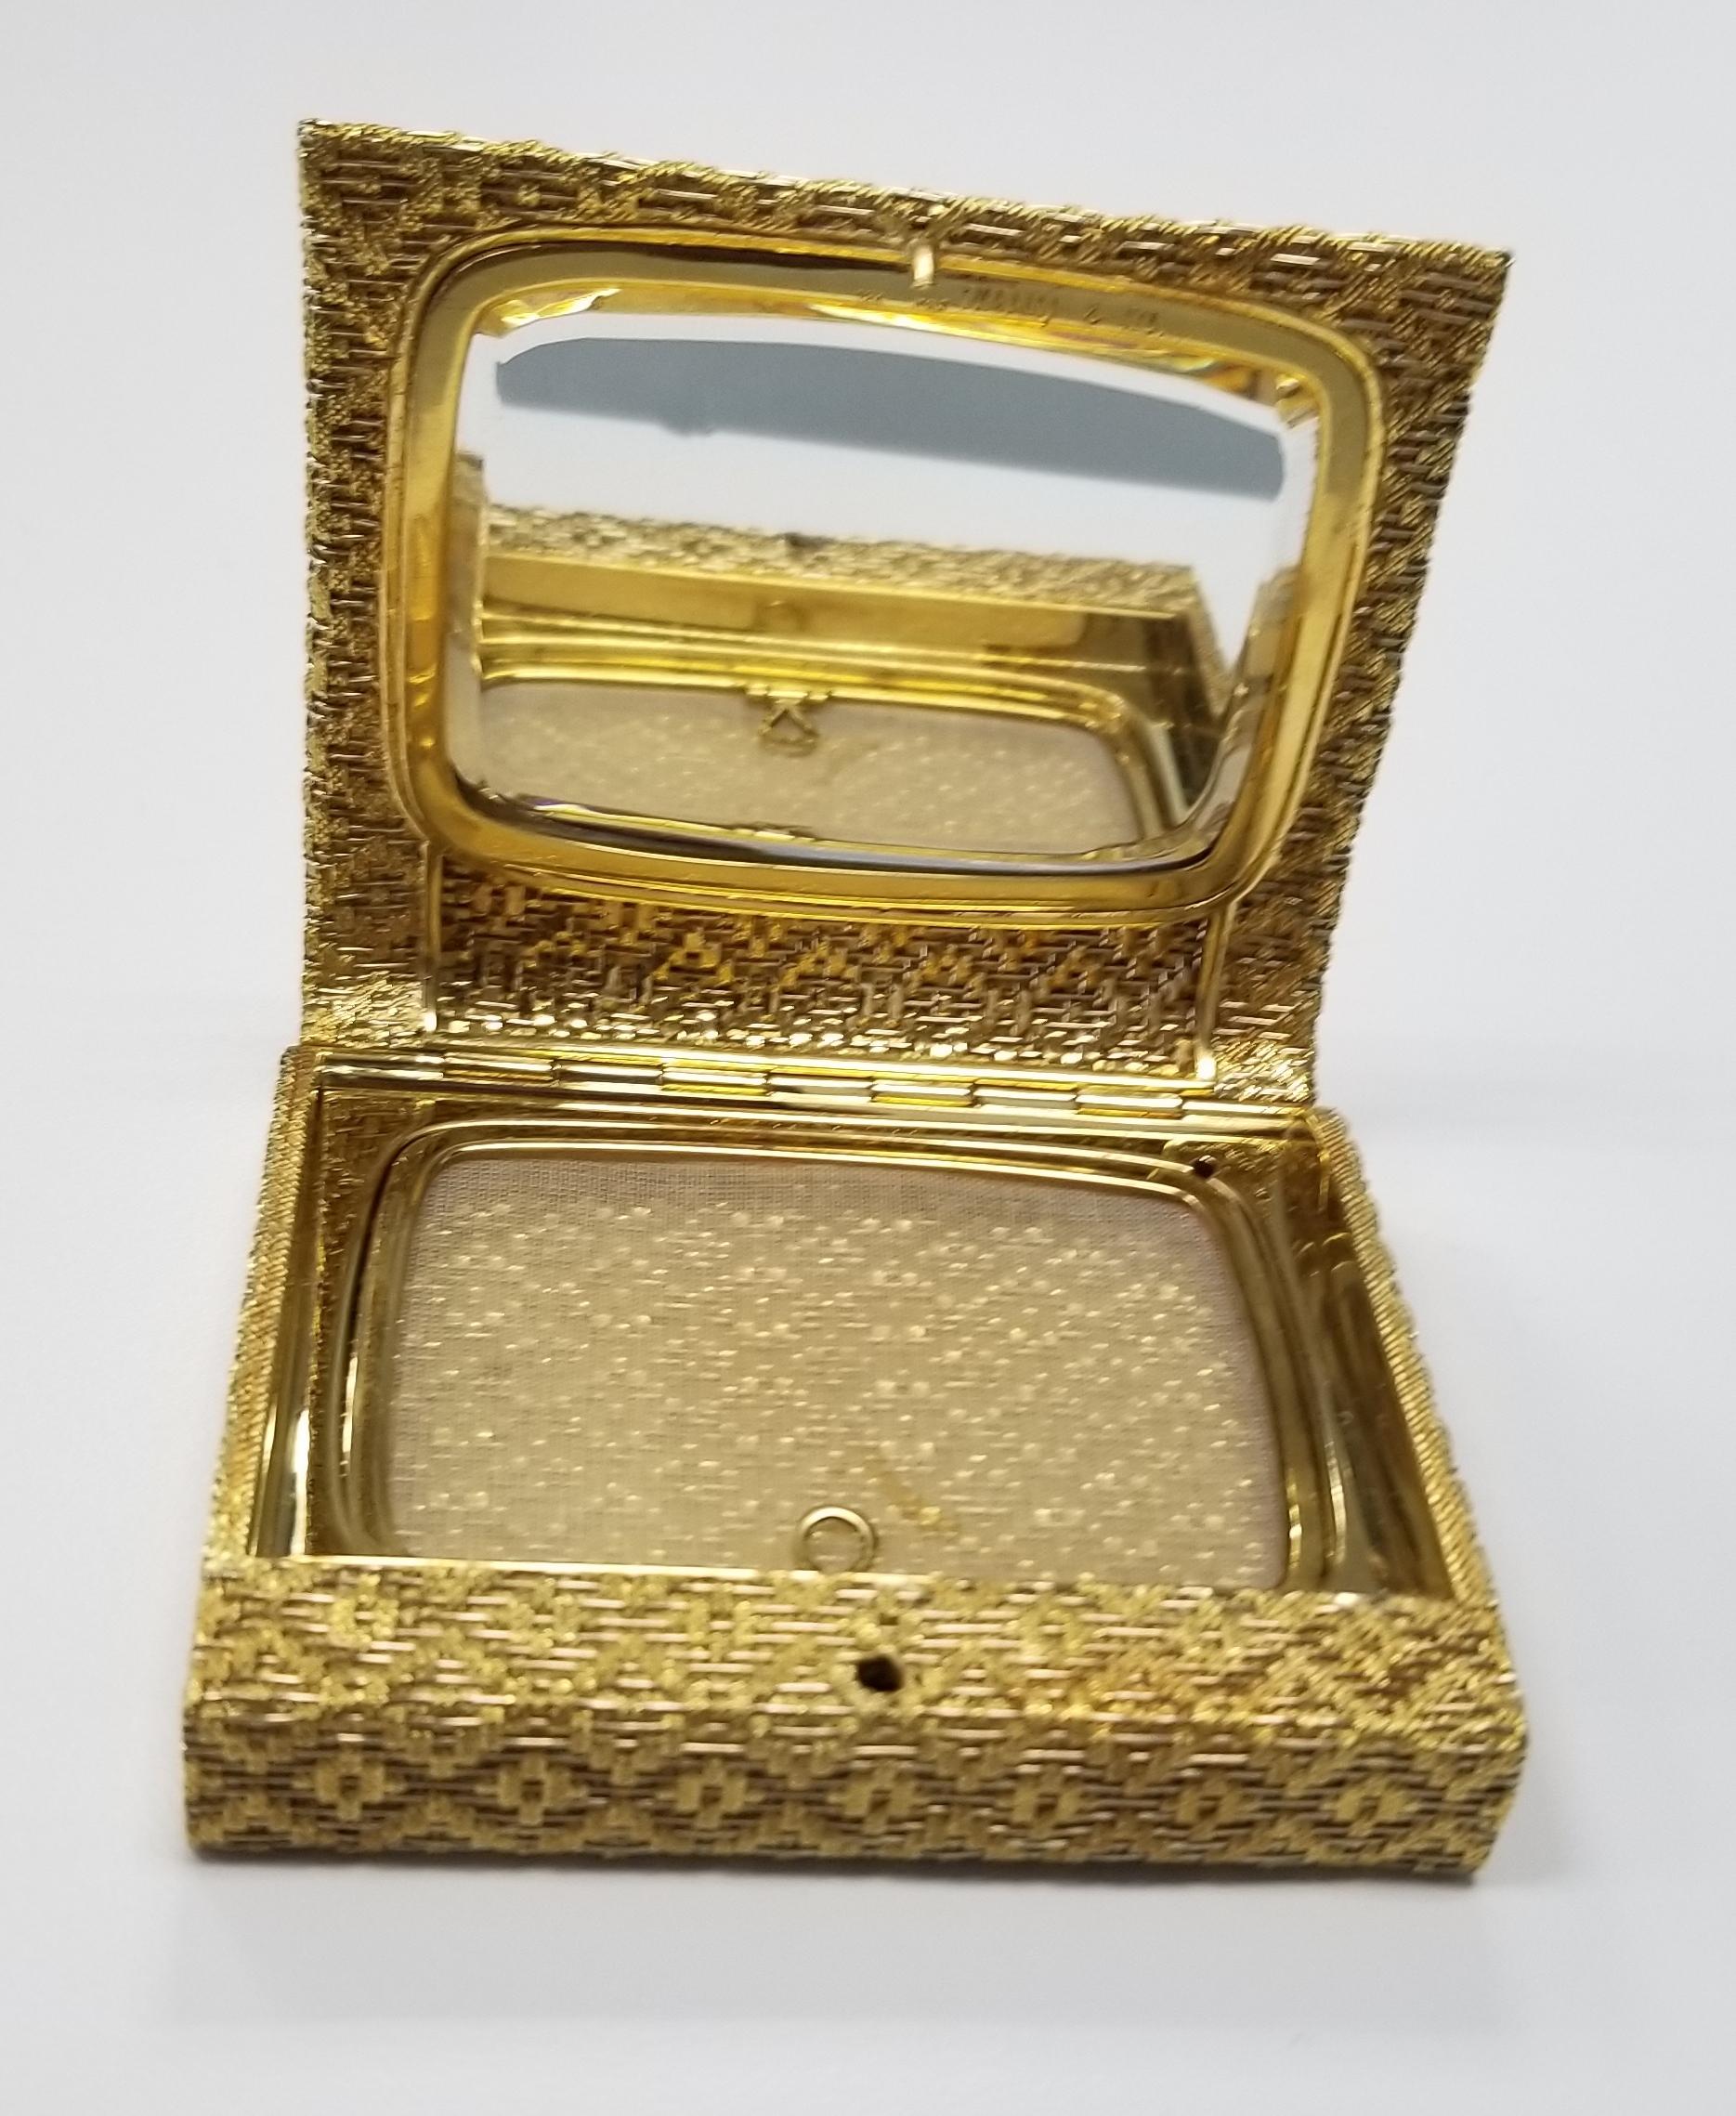 Tiffany & Co. 1980s 18k Yellow Gold Powder Compact Case In Excellent Condition For Sale In Los Angeles, CA